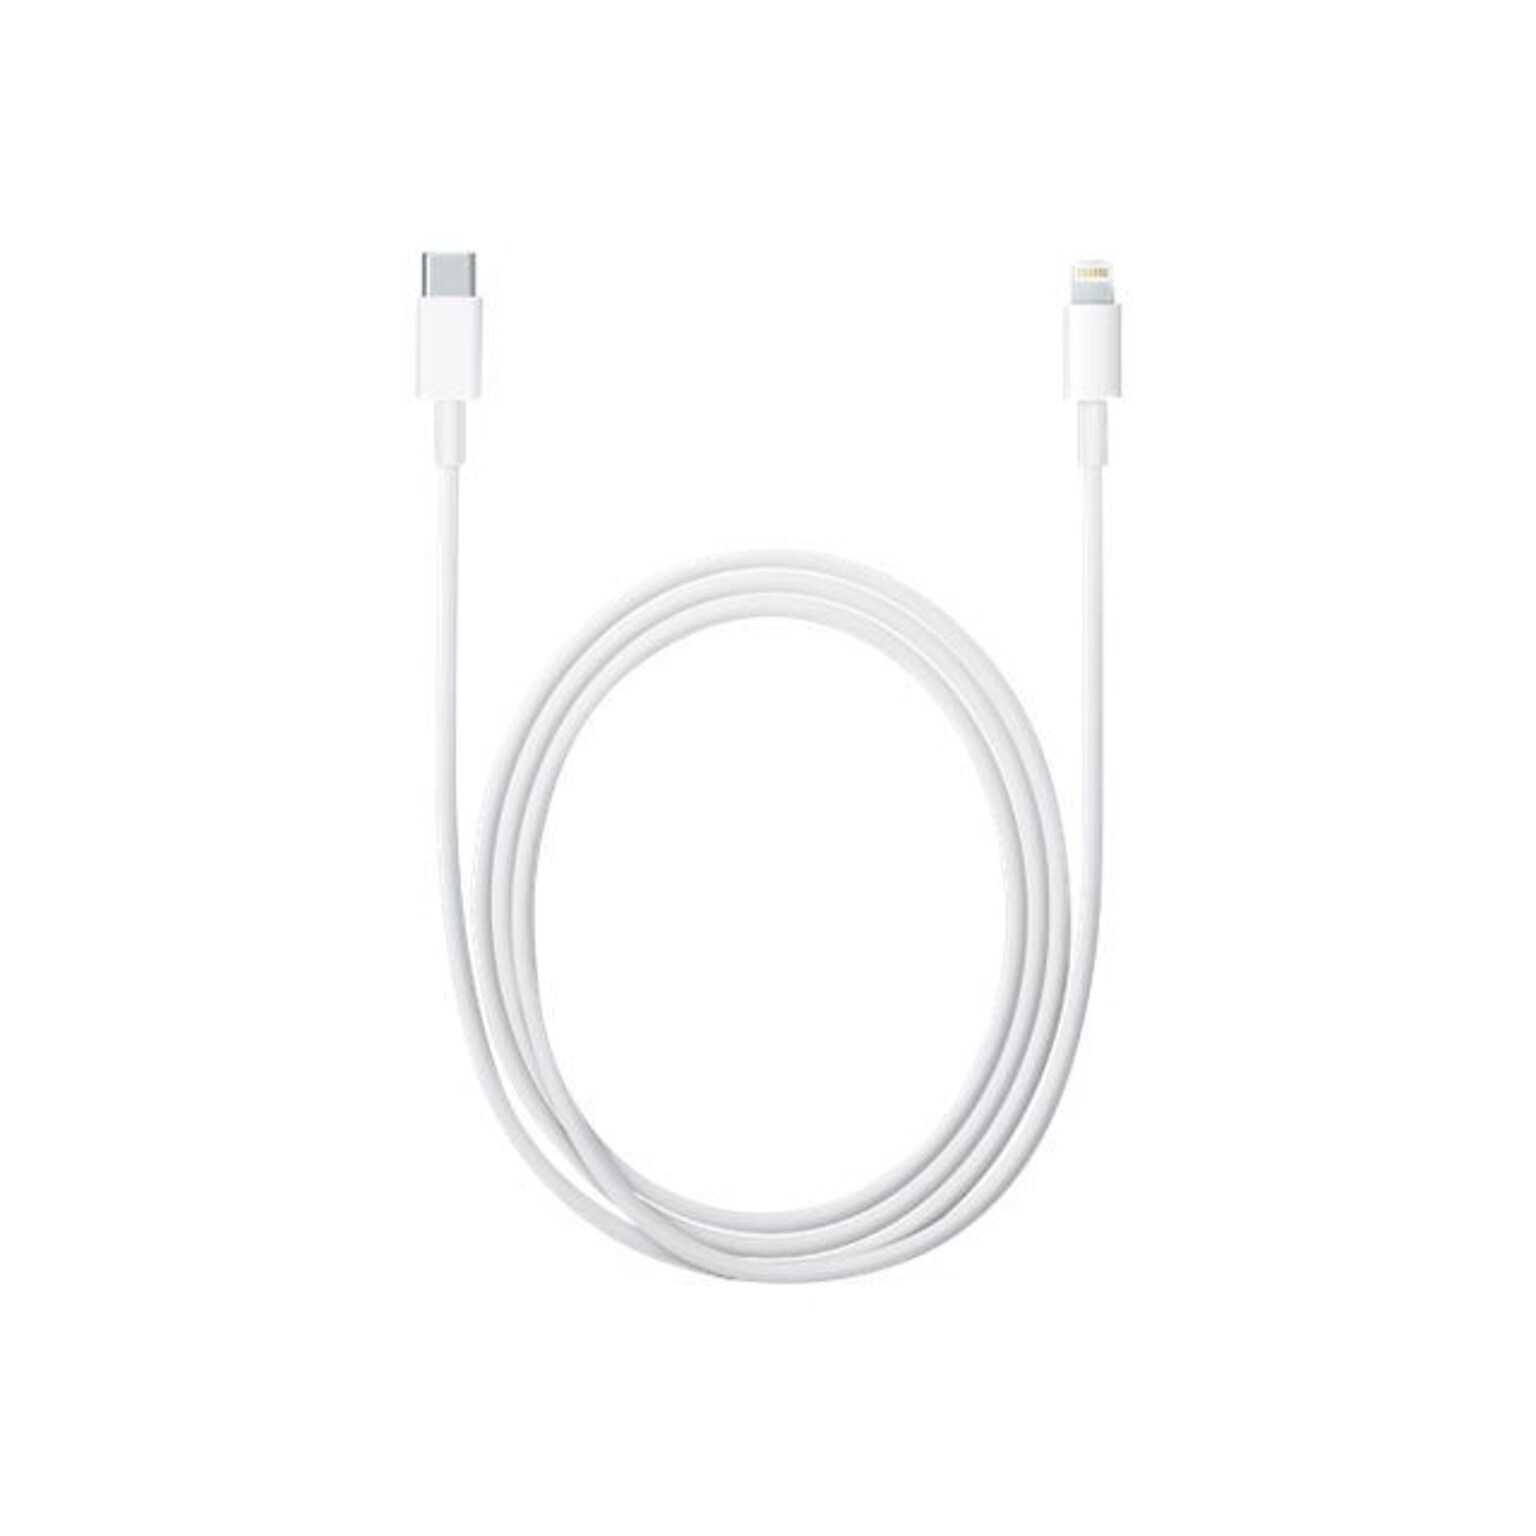 Apple USB-C To Lightning Cable - iPad / iPhone / iPod Charging / Data Cable - Lightning / USB - 6.6 Ft - MKQ42AM/A - White